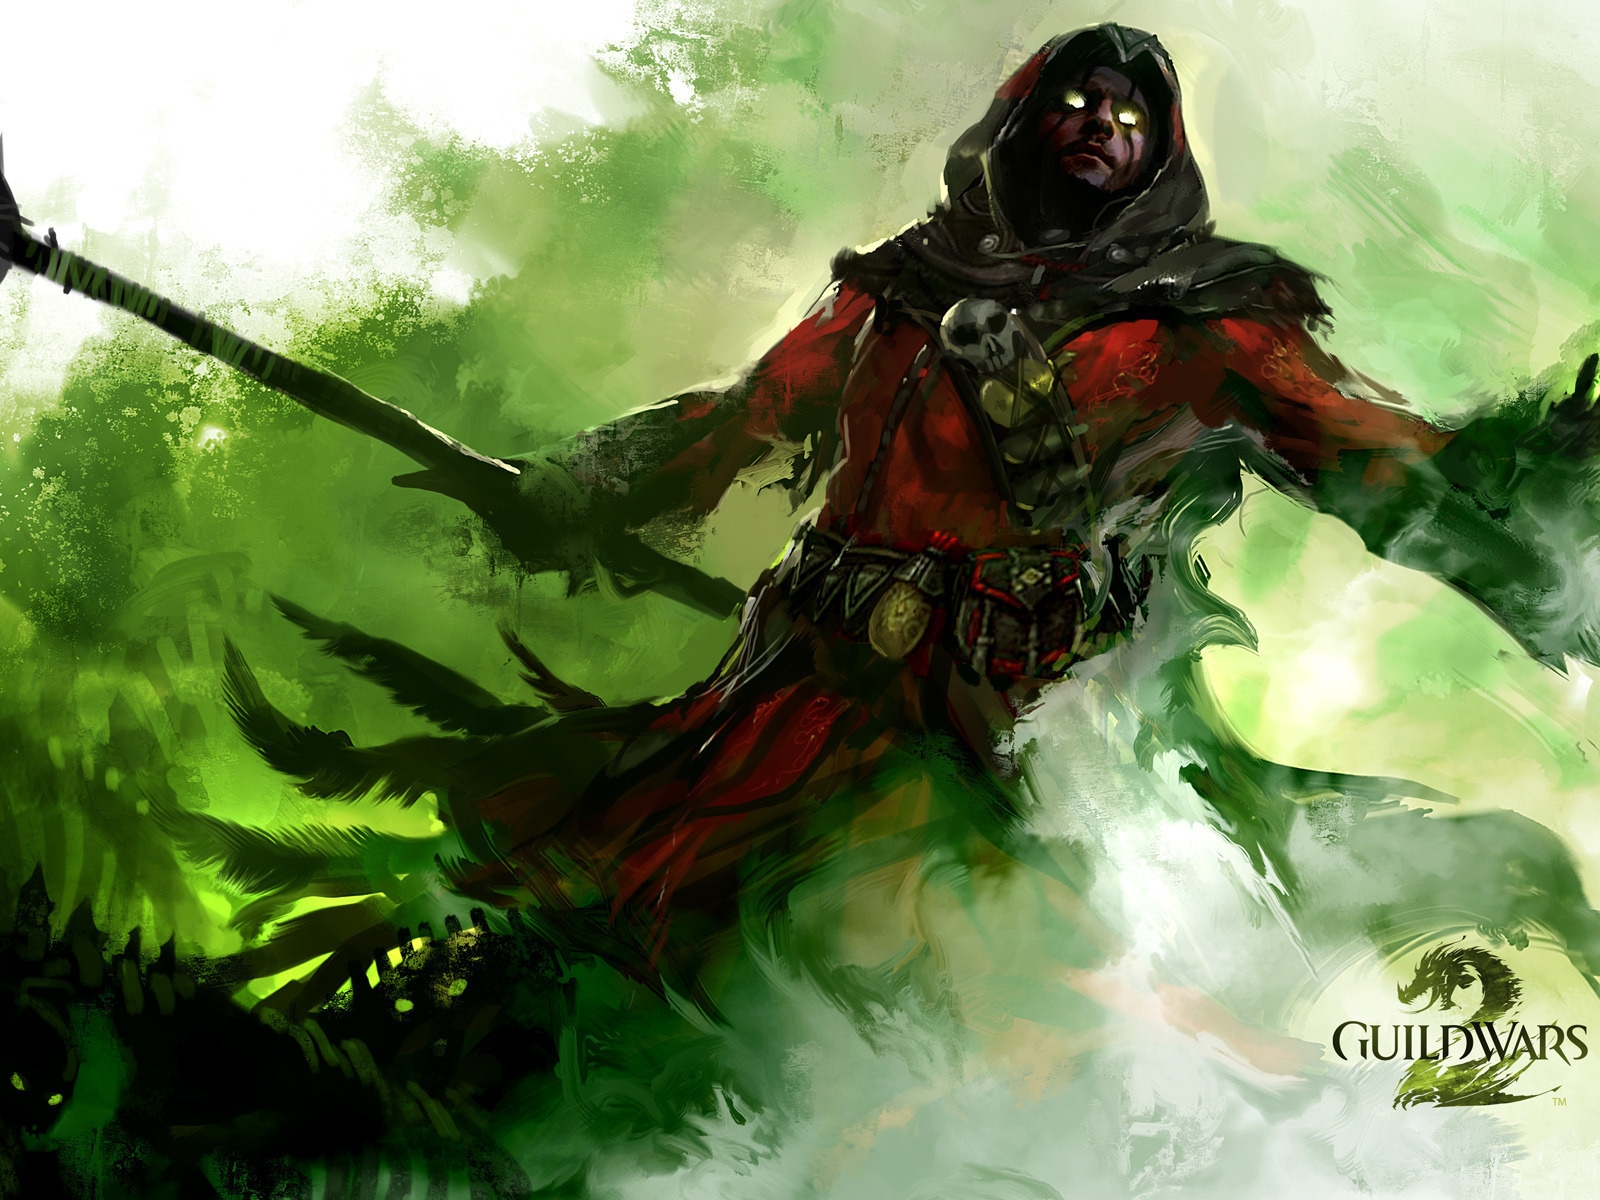 Great Guild Wars 2 for 1600 x 1200 resolution